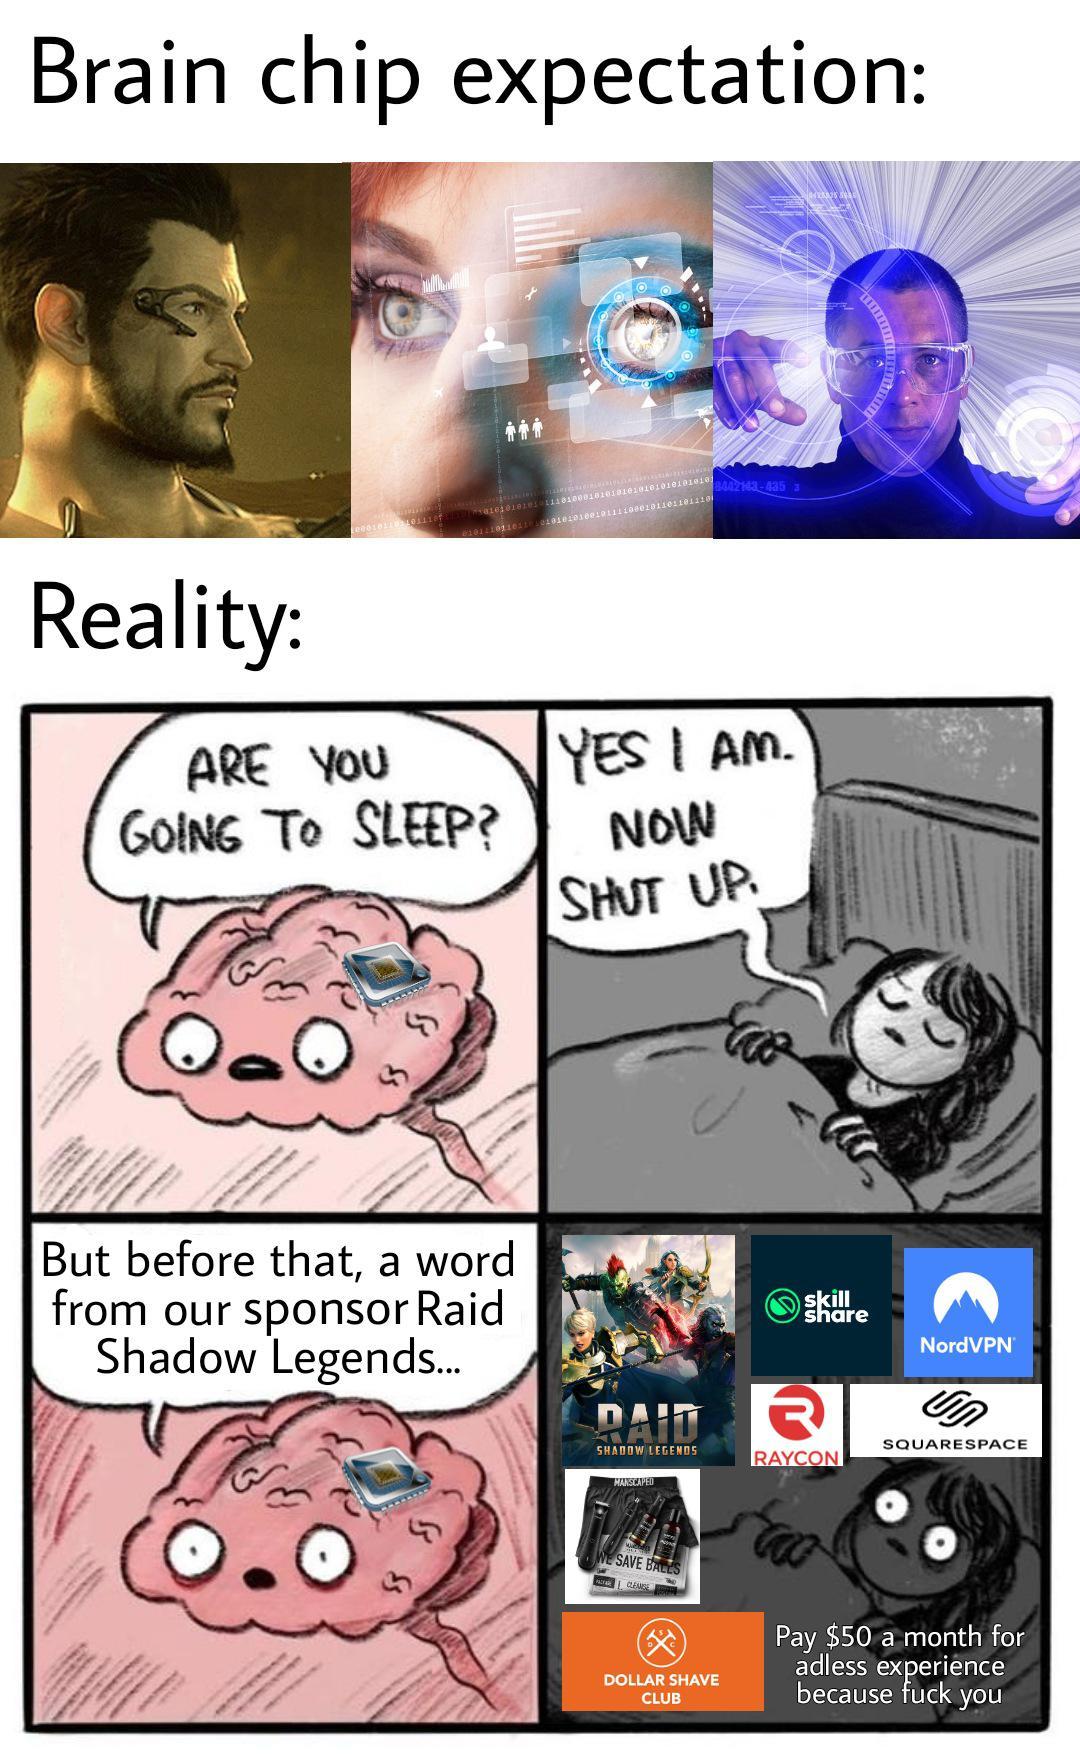 gaming memes - meme raid shadow legends - Brain chip expectation Reality 10001011021011101 01010101010 01011101101100101010100101111000101101101110 Are You Going To Sleep? 010001010101010101010101010 But before that, a word from our sponsor Raid Shadow Le